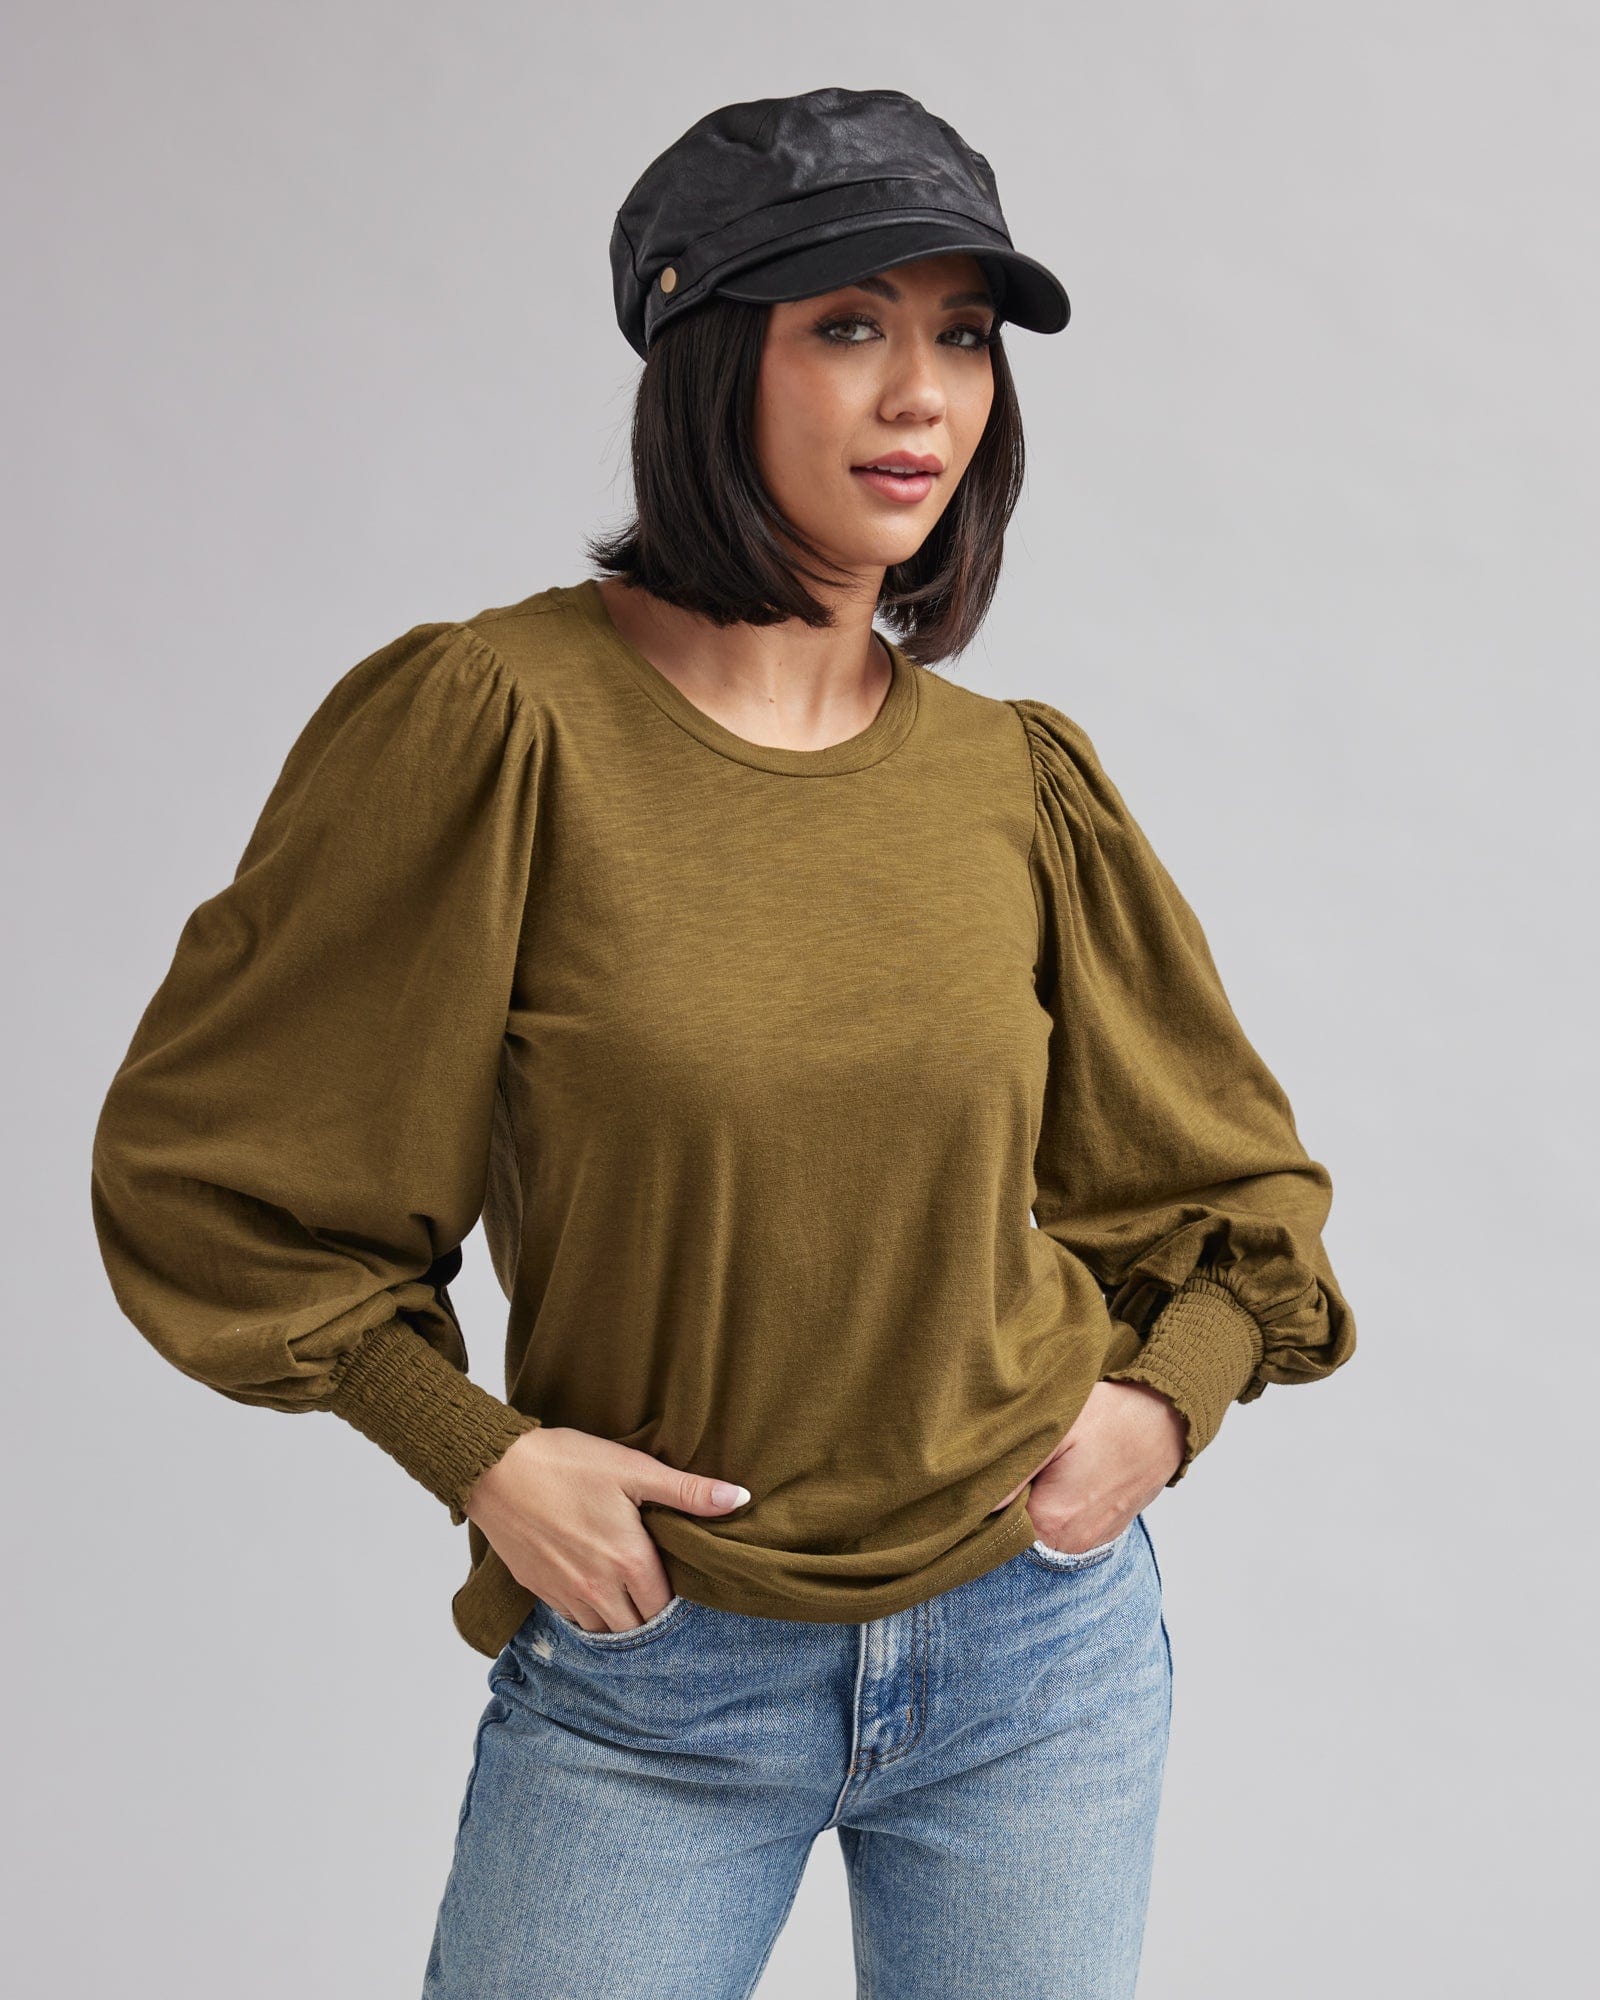 Woman in a long sleeved, balloon sleeved, t-shirt